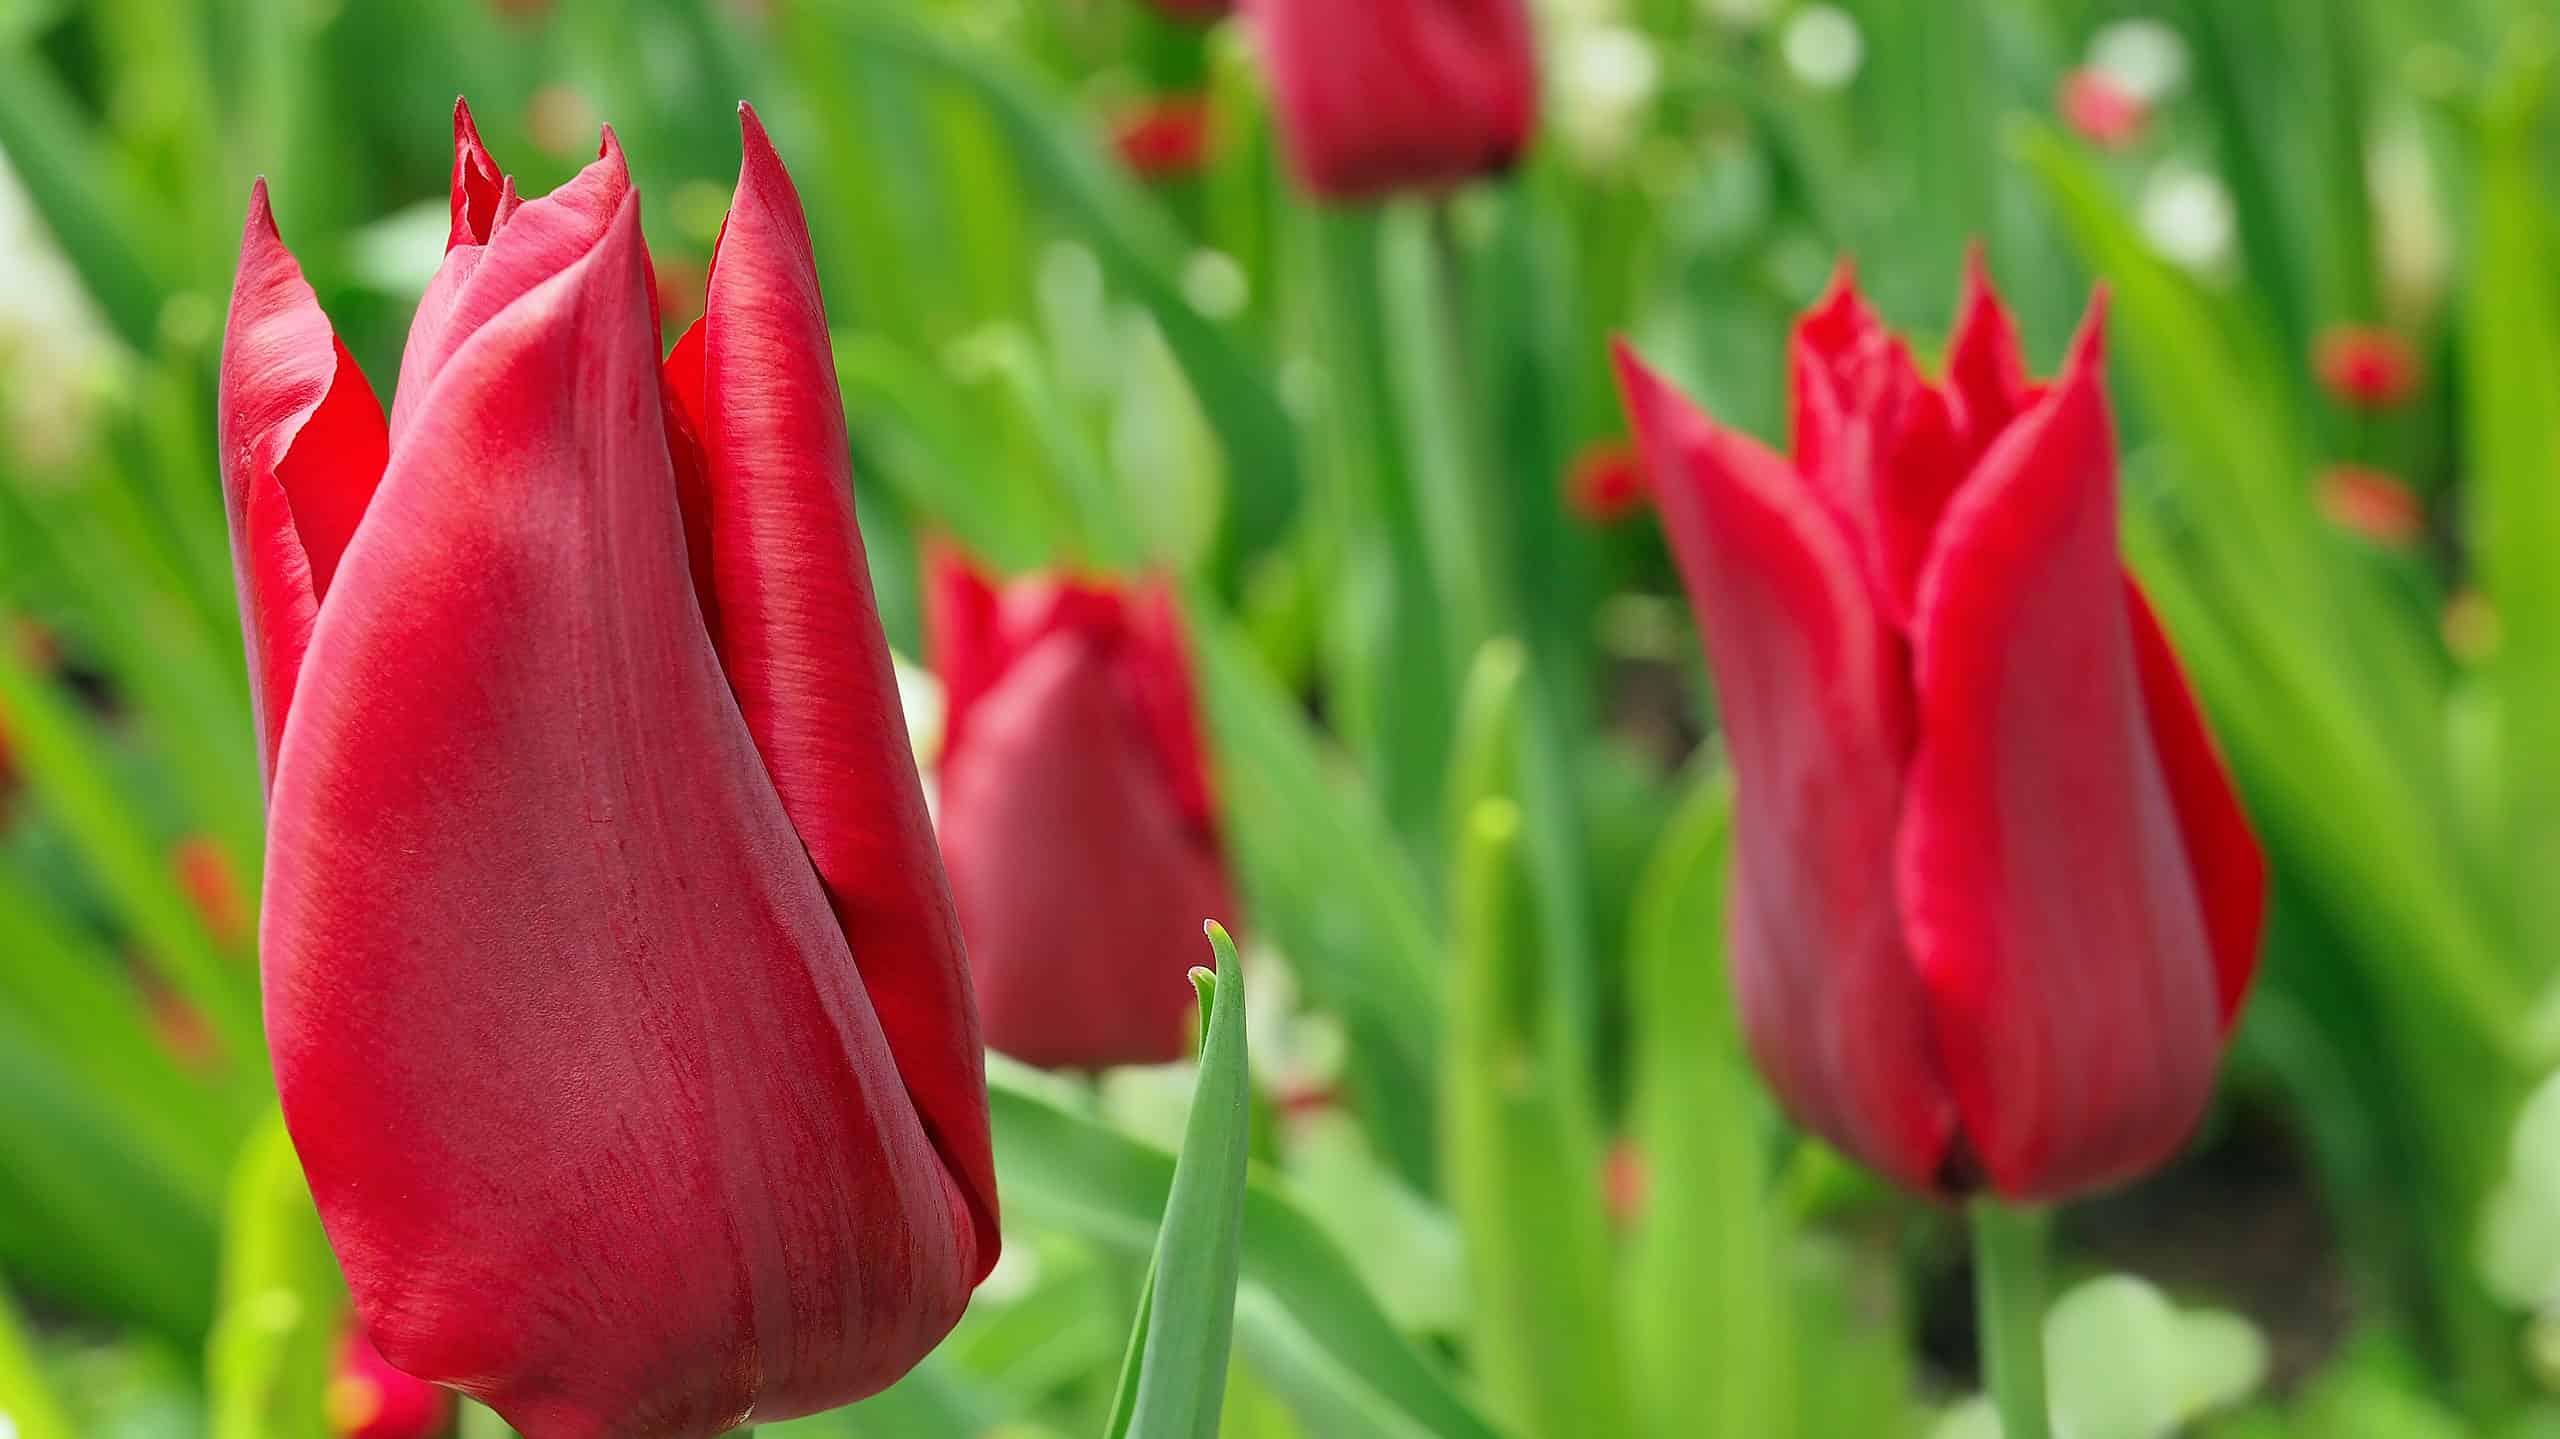 Red Emperor Tulips blooming in a flowerbed